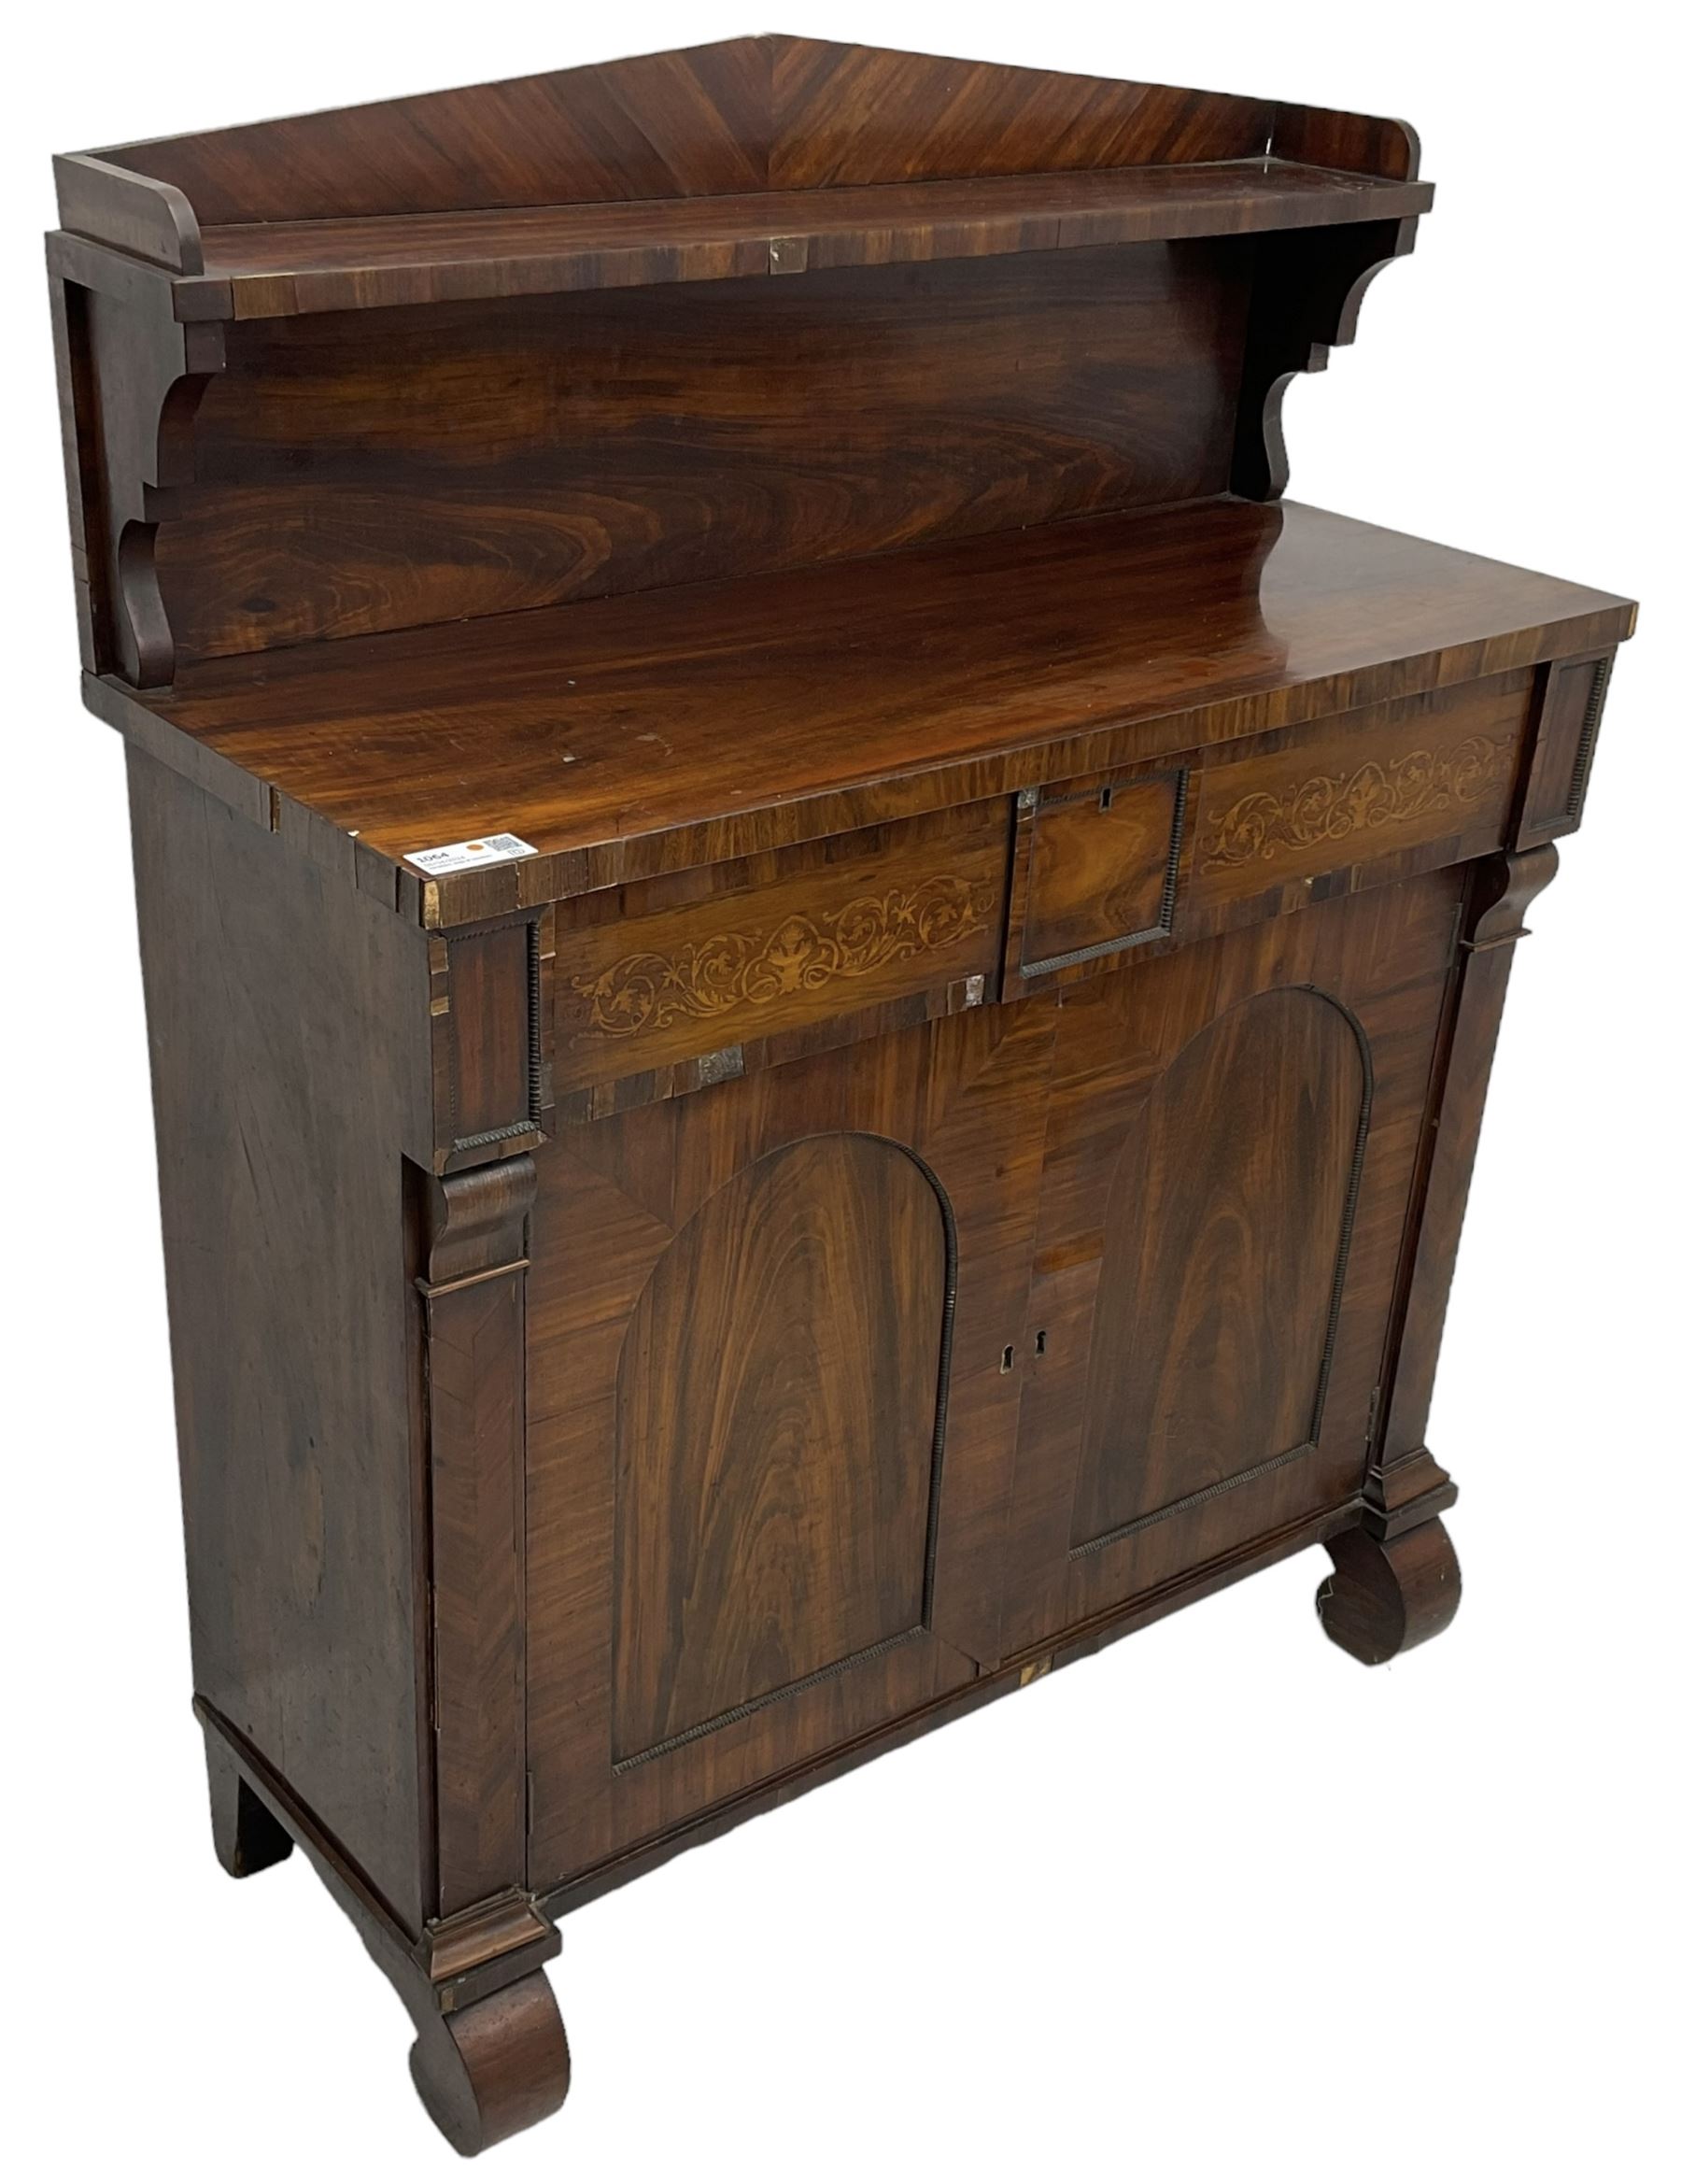 Early 19th century rosewood chiffonier - Image 3 of 7